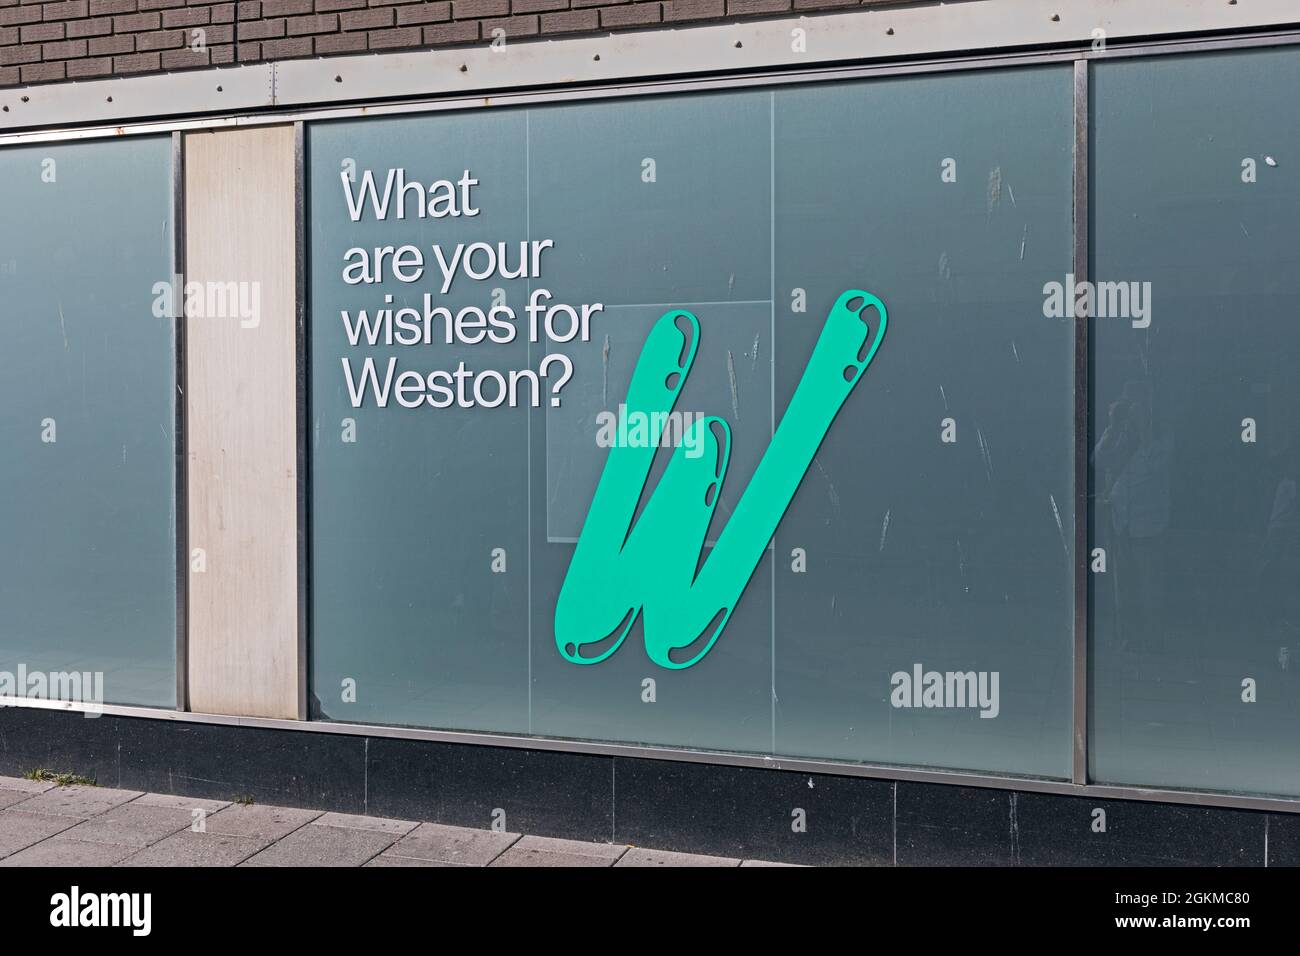 A sign with the slogan “What are your wishes for Weston?” in the window of the empty former Marks and Spencer shop in Weston-super-Mare, UK Stock Photo